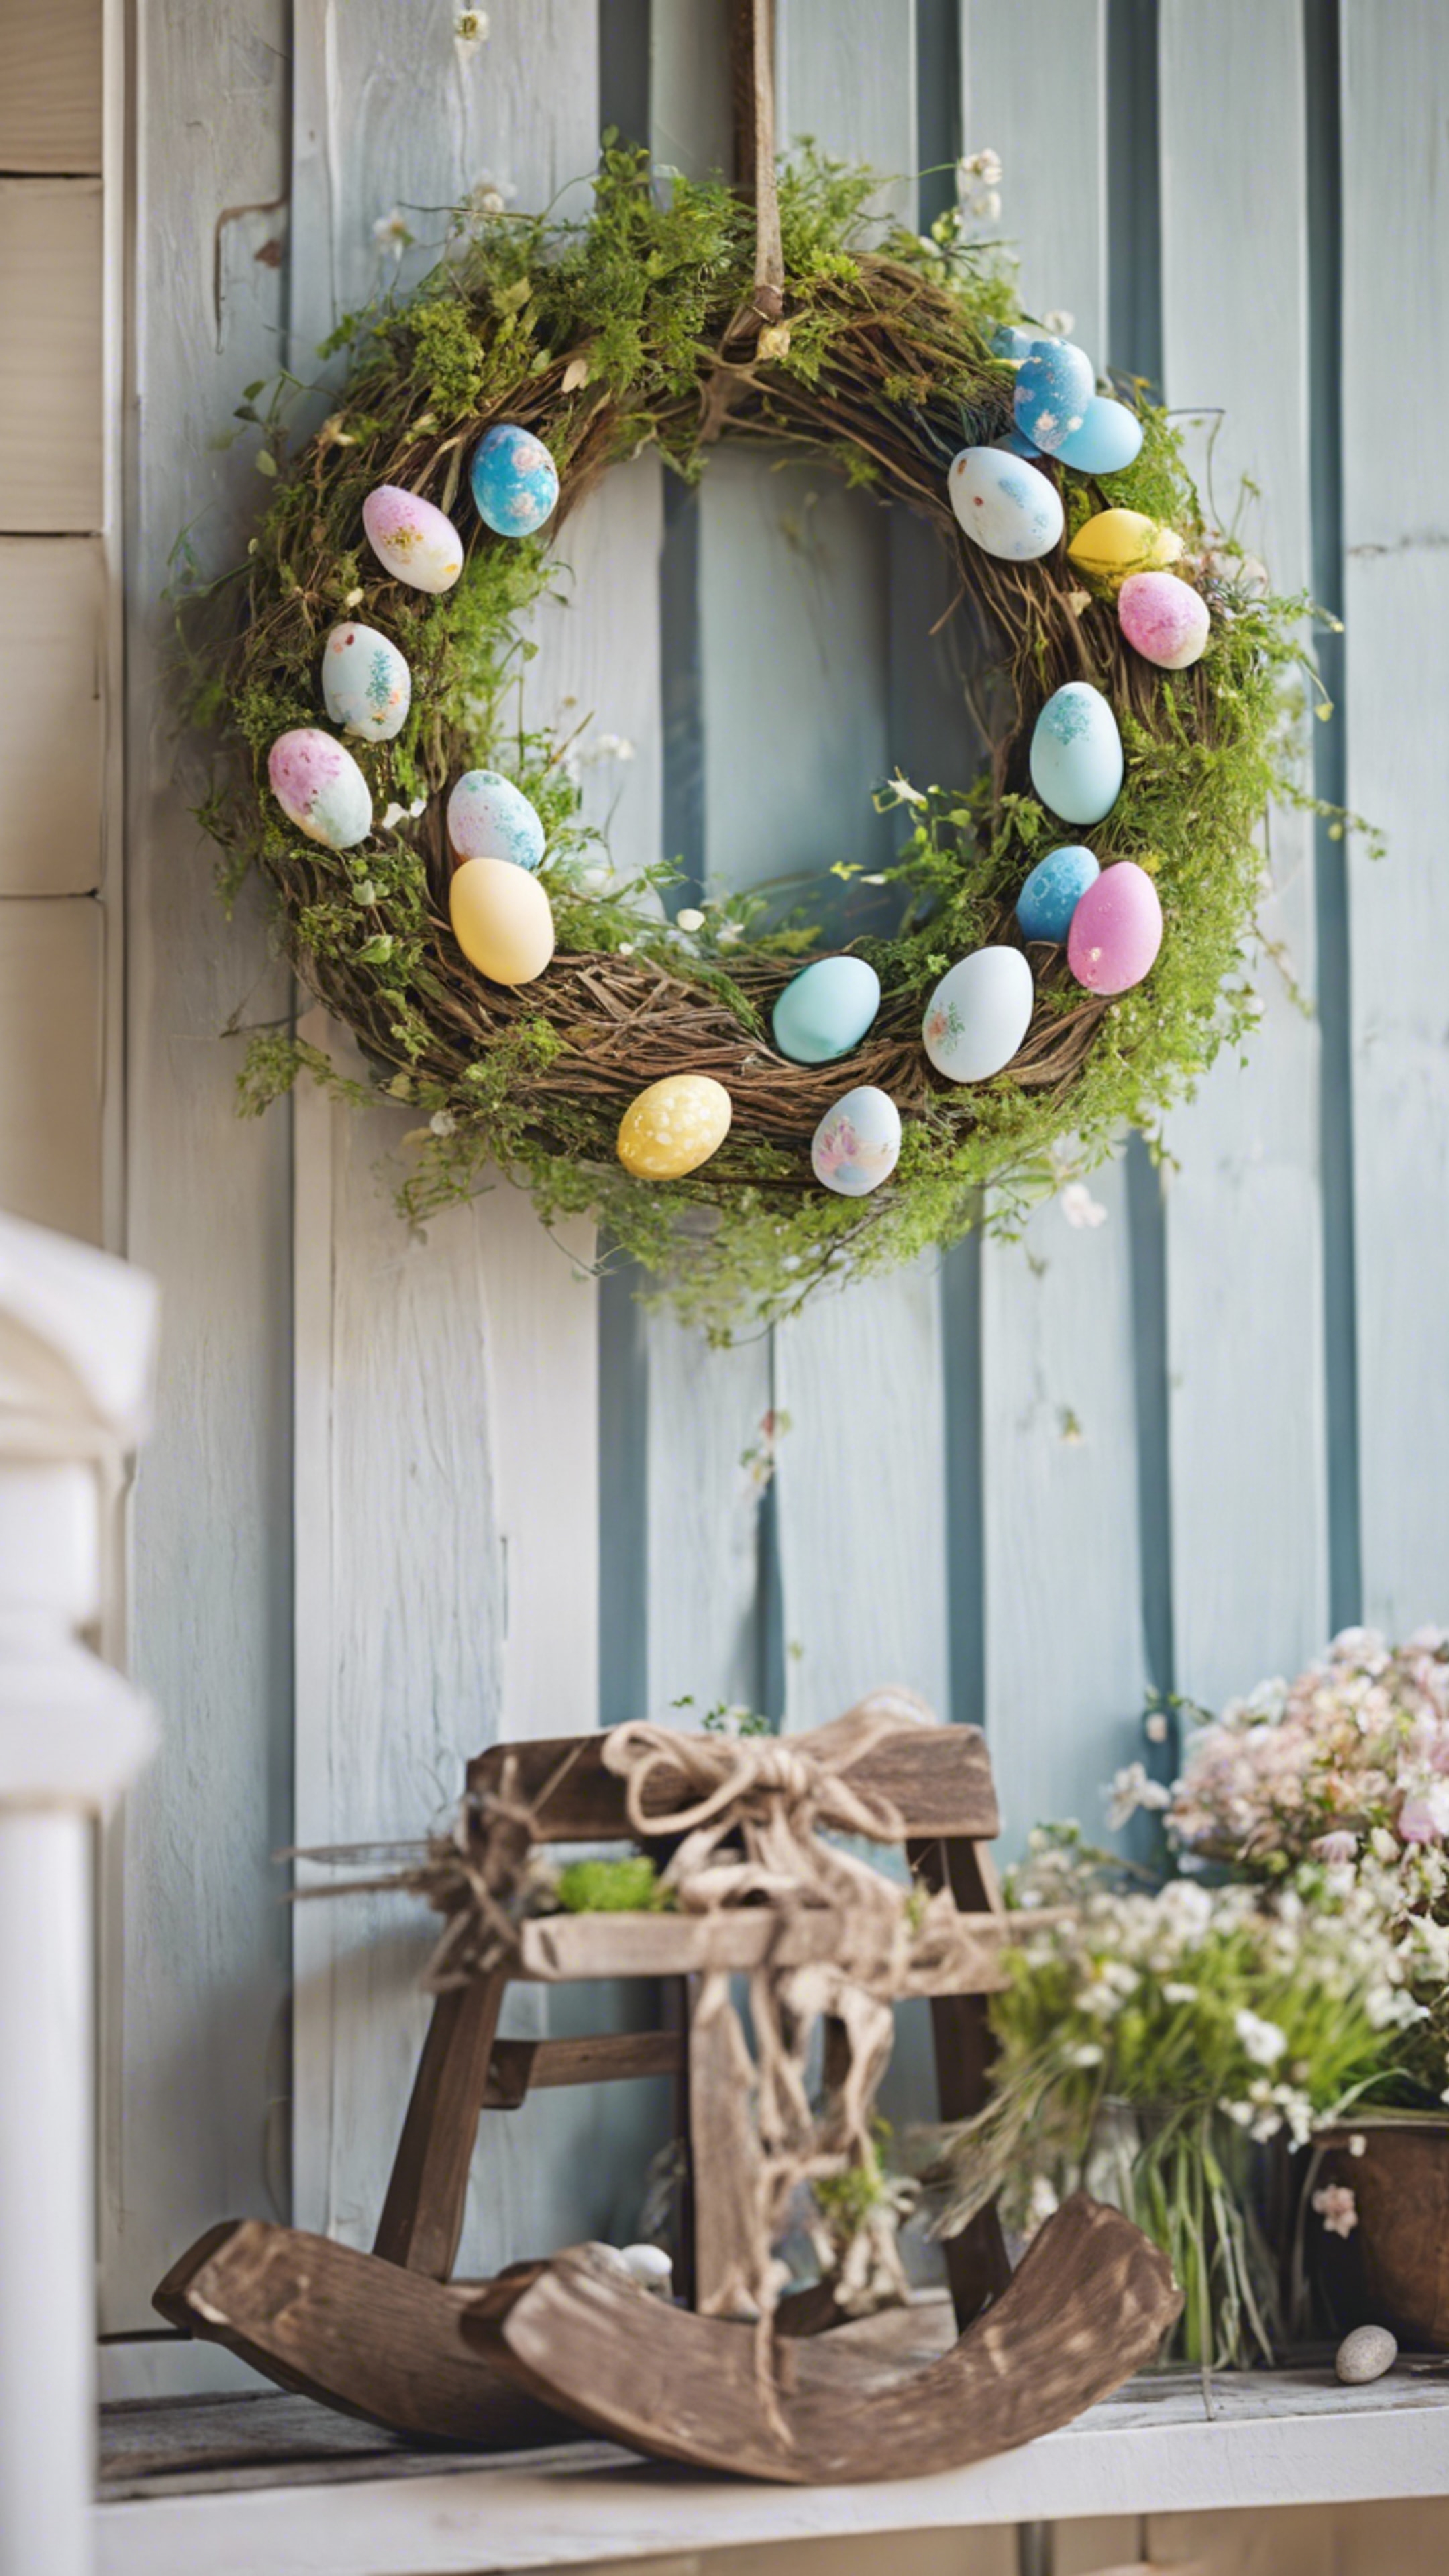 Country-style Easter decorative wreath hanging on a front porch, inviting the spring spirits. Тапет[efa72fd9539f4de39955]